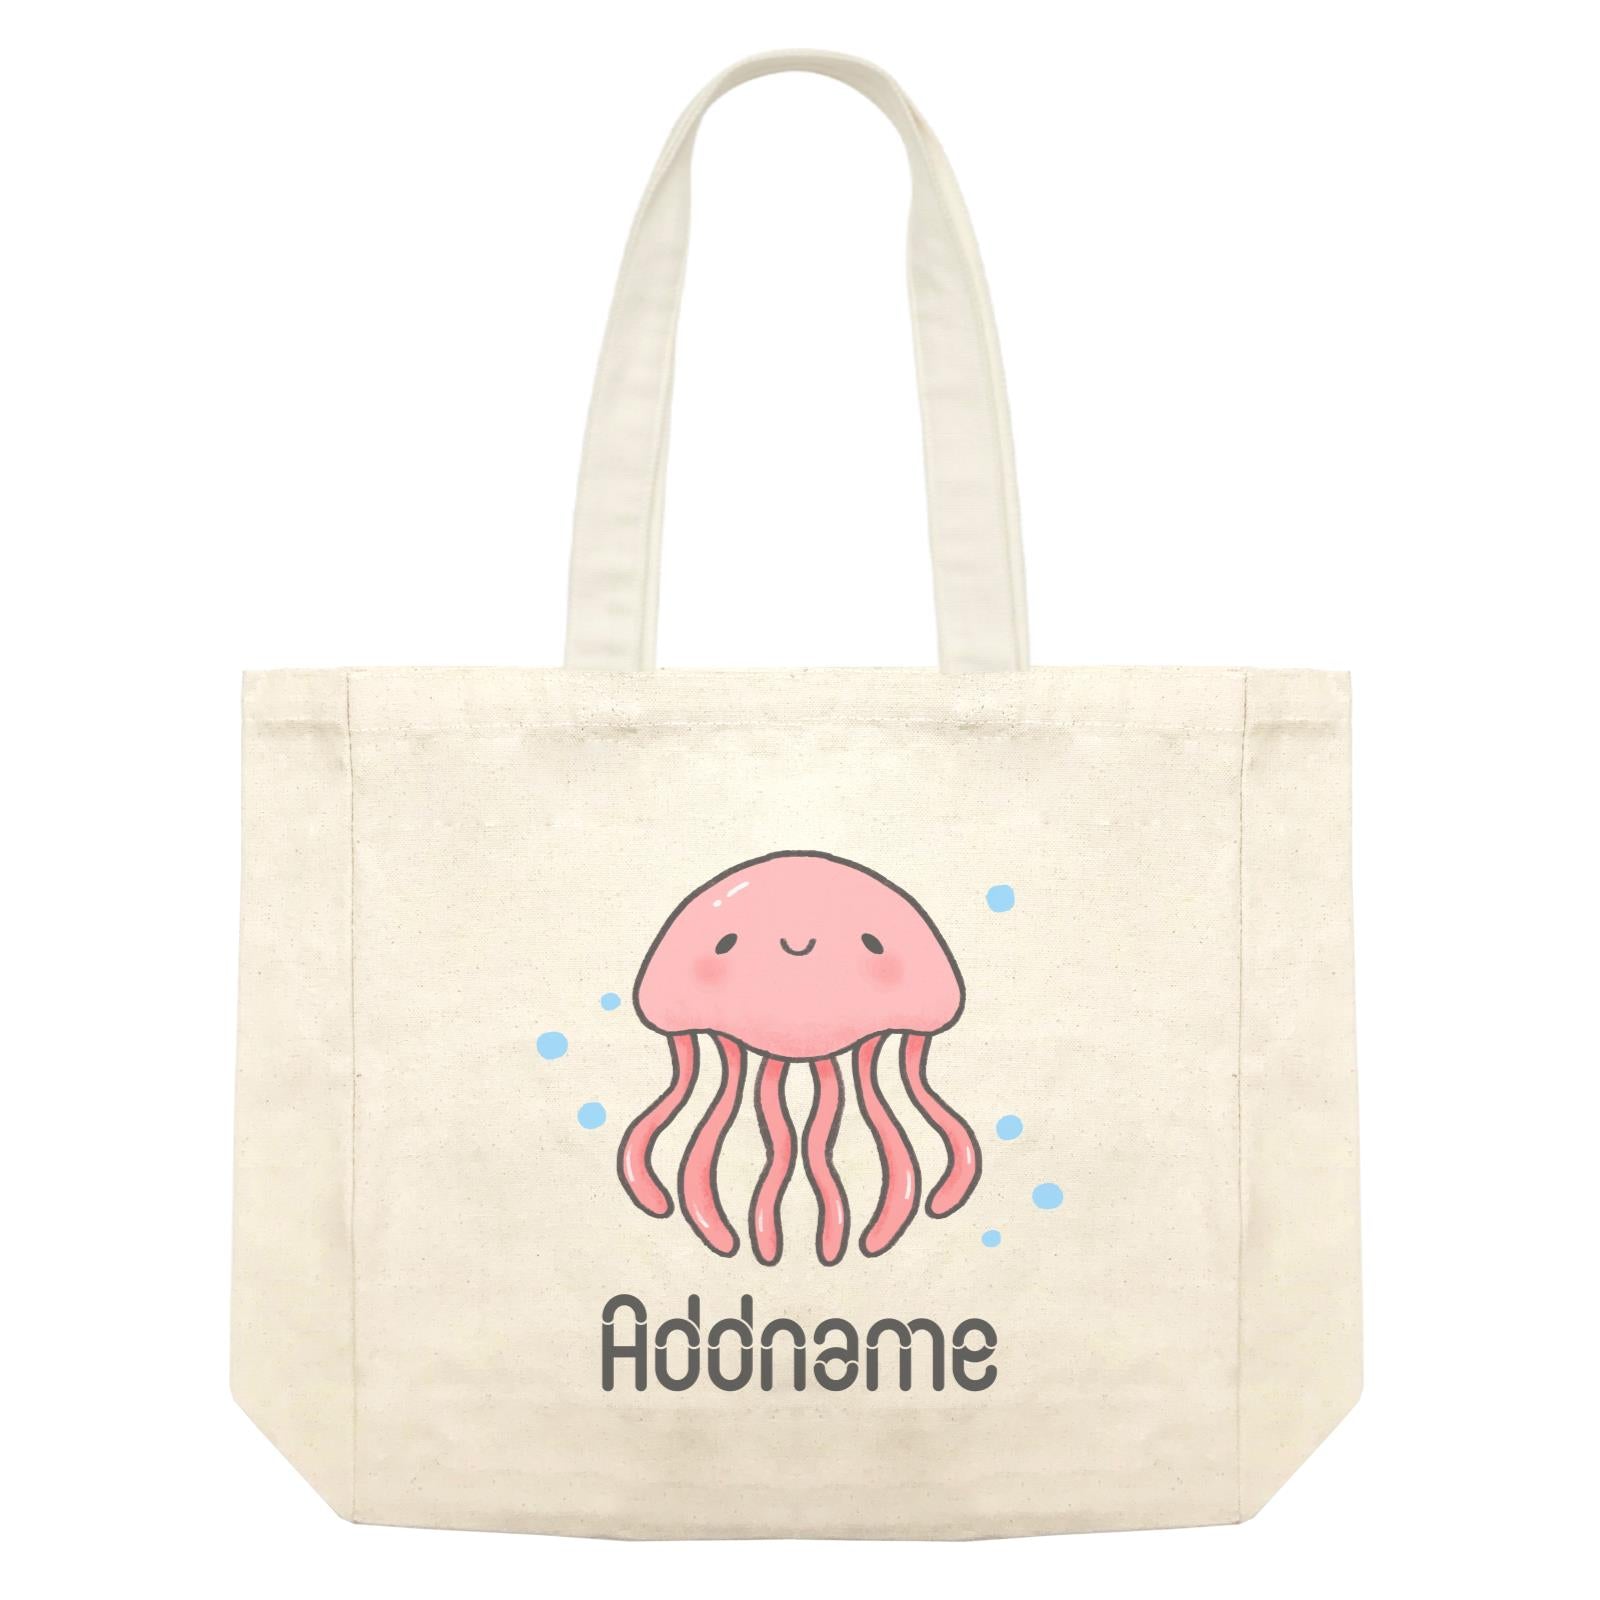 Cute Hand Drawn Style Jellyfish Addname Shopping Bag